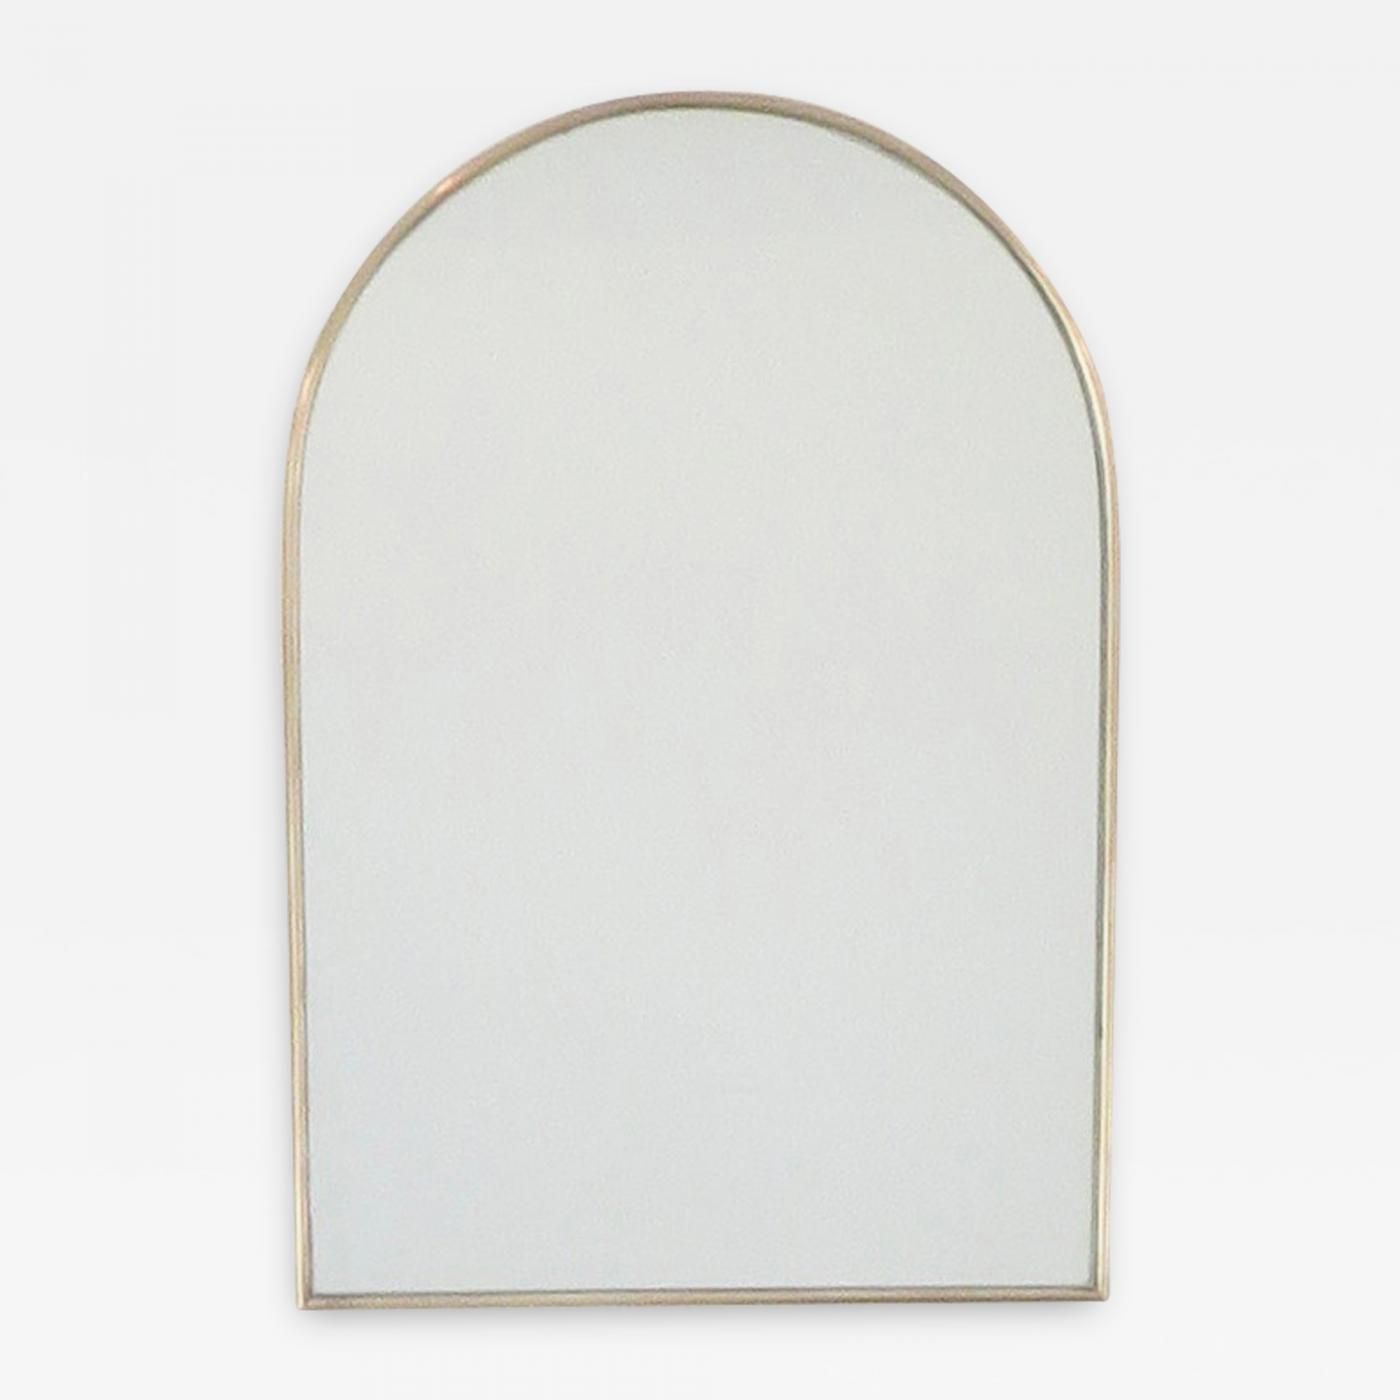 Italian Brass Framed Wall Mirror Arch Top Throughout Bronze Arch Top Wall Mirrors (View 12 of 15)